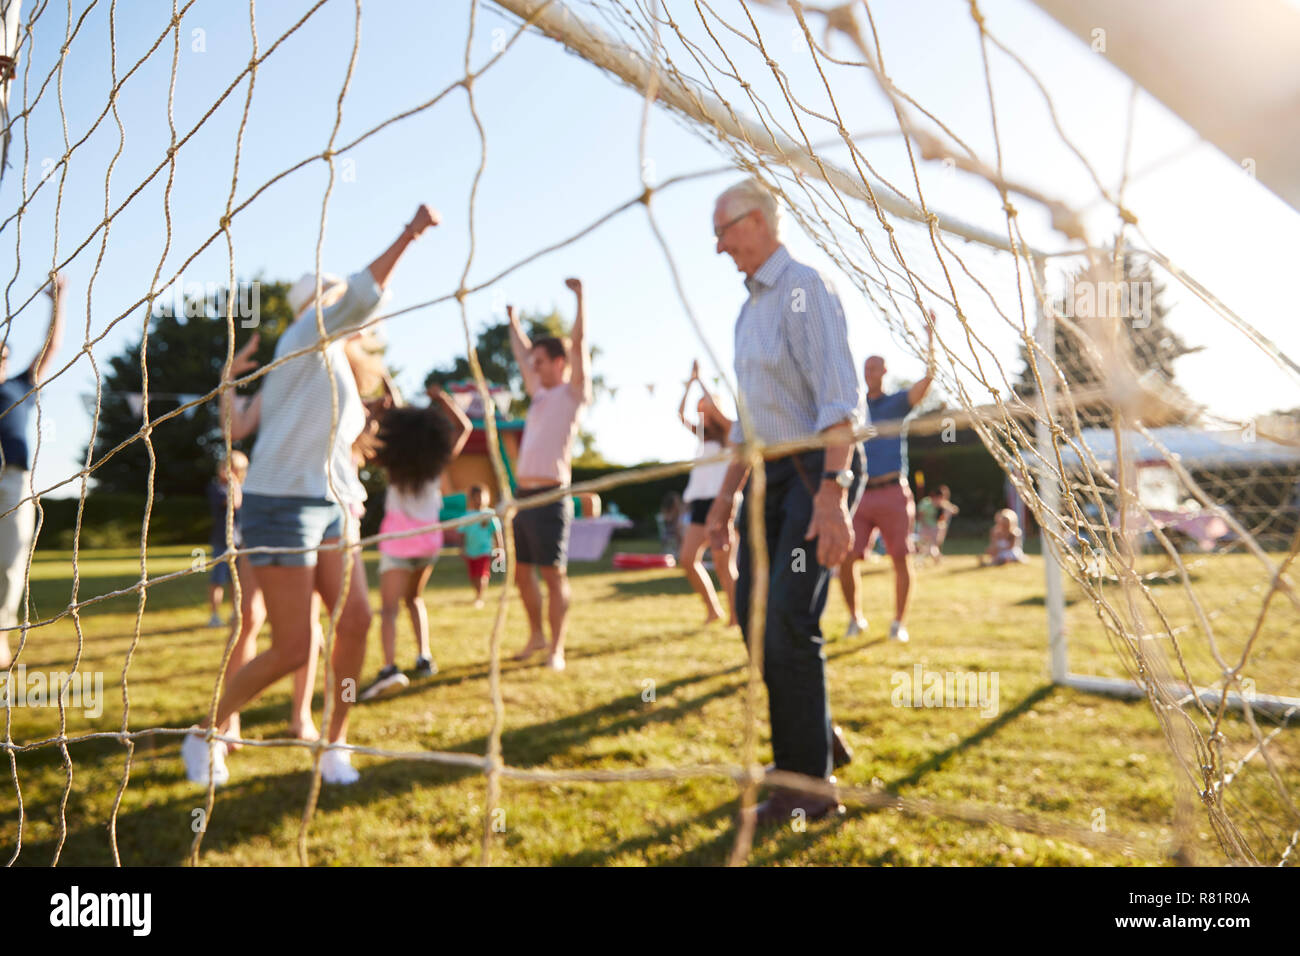 Children Playing Football Match With Adults At Summer Garden Fete Stock Photo